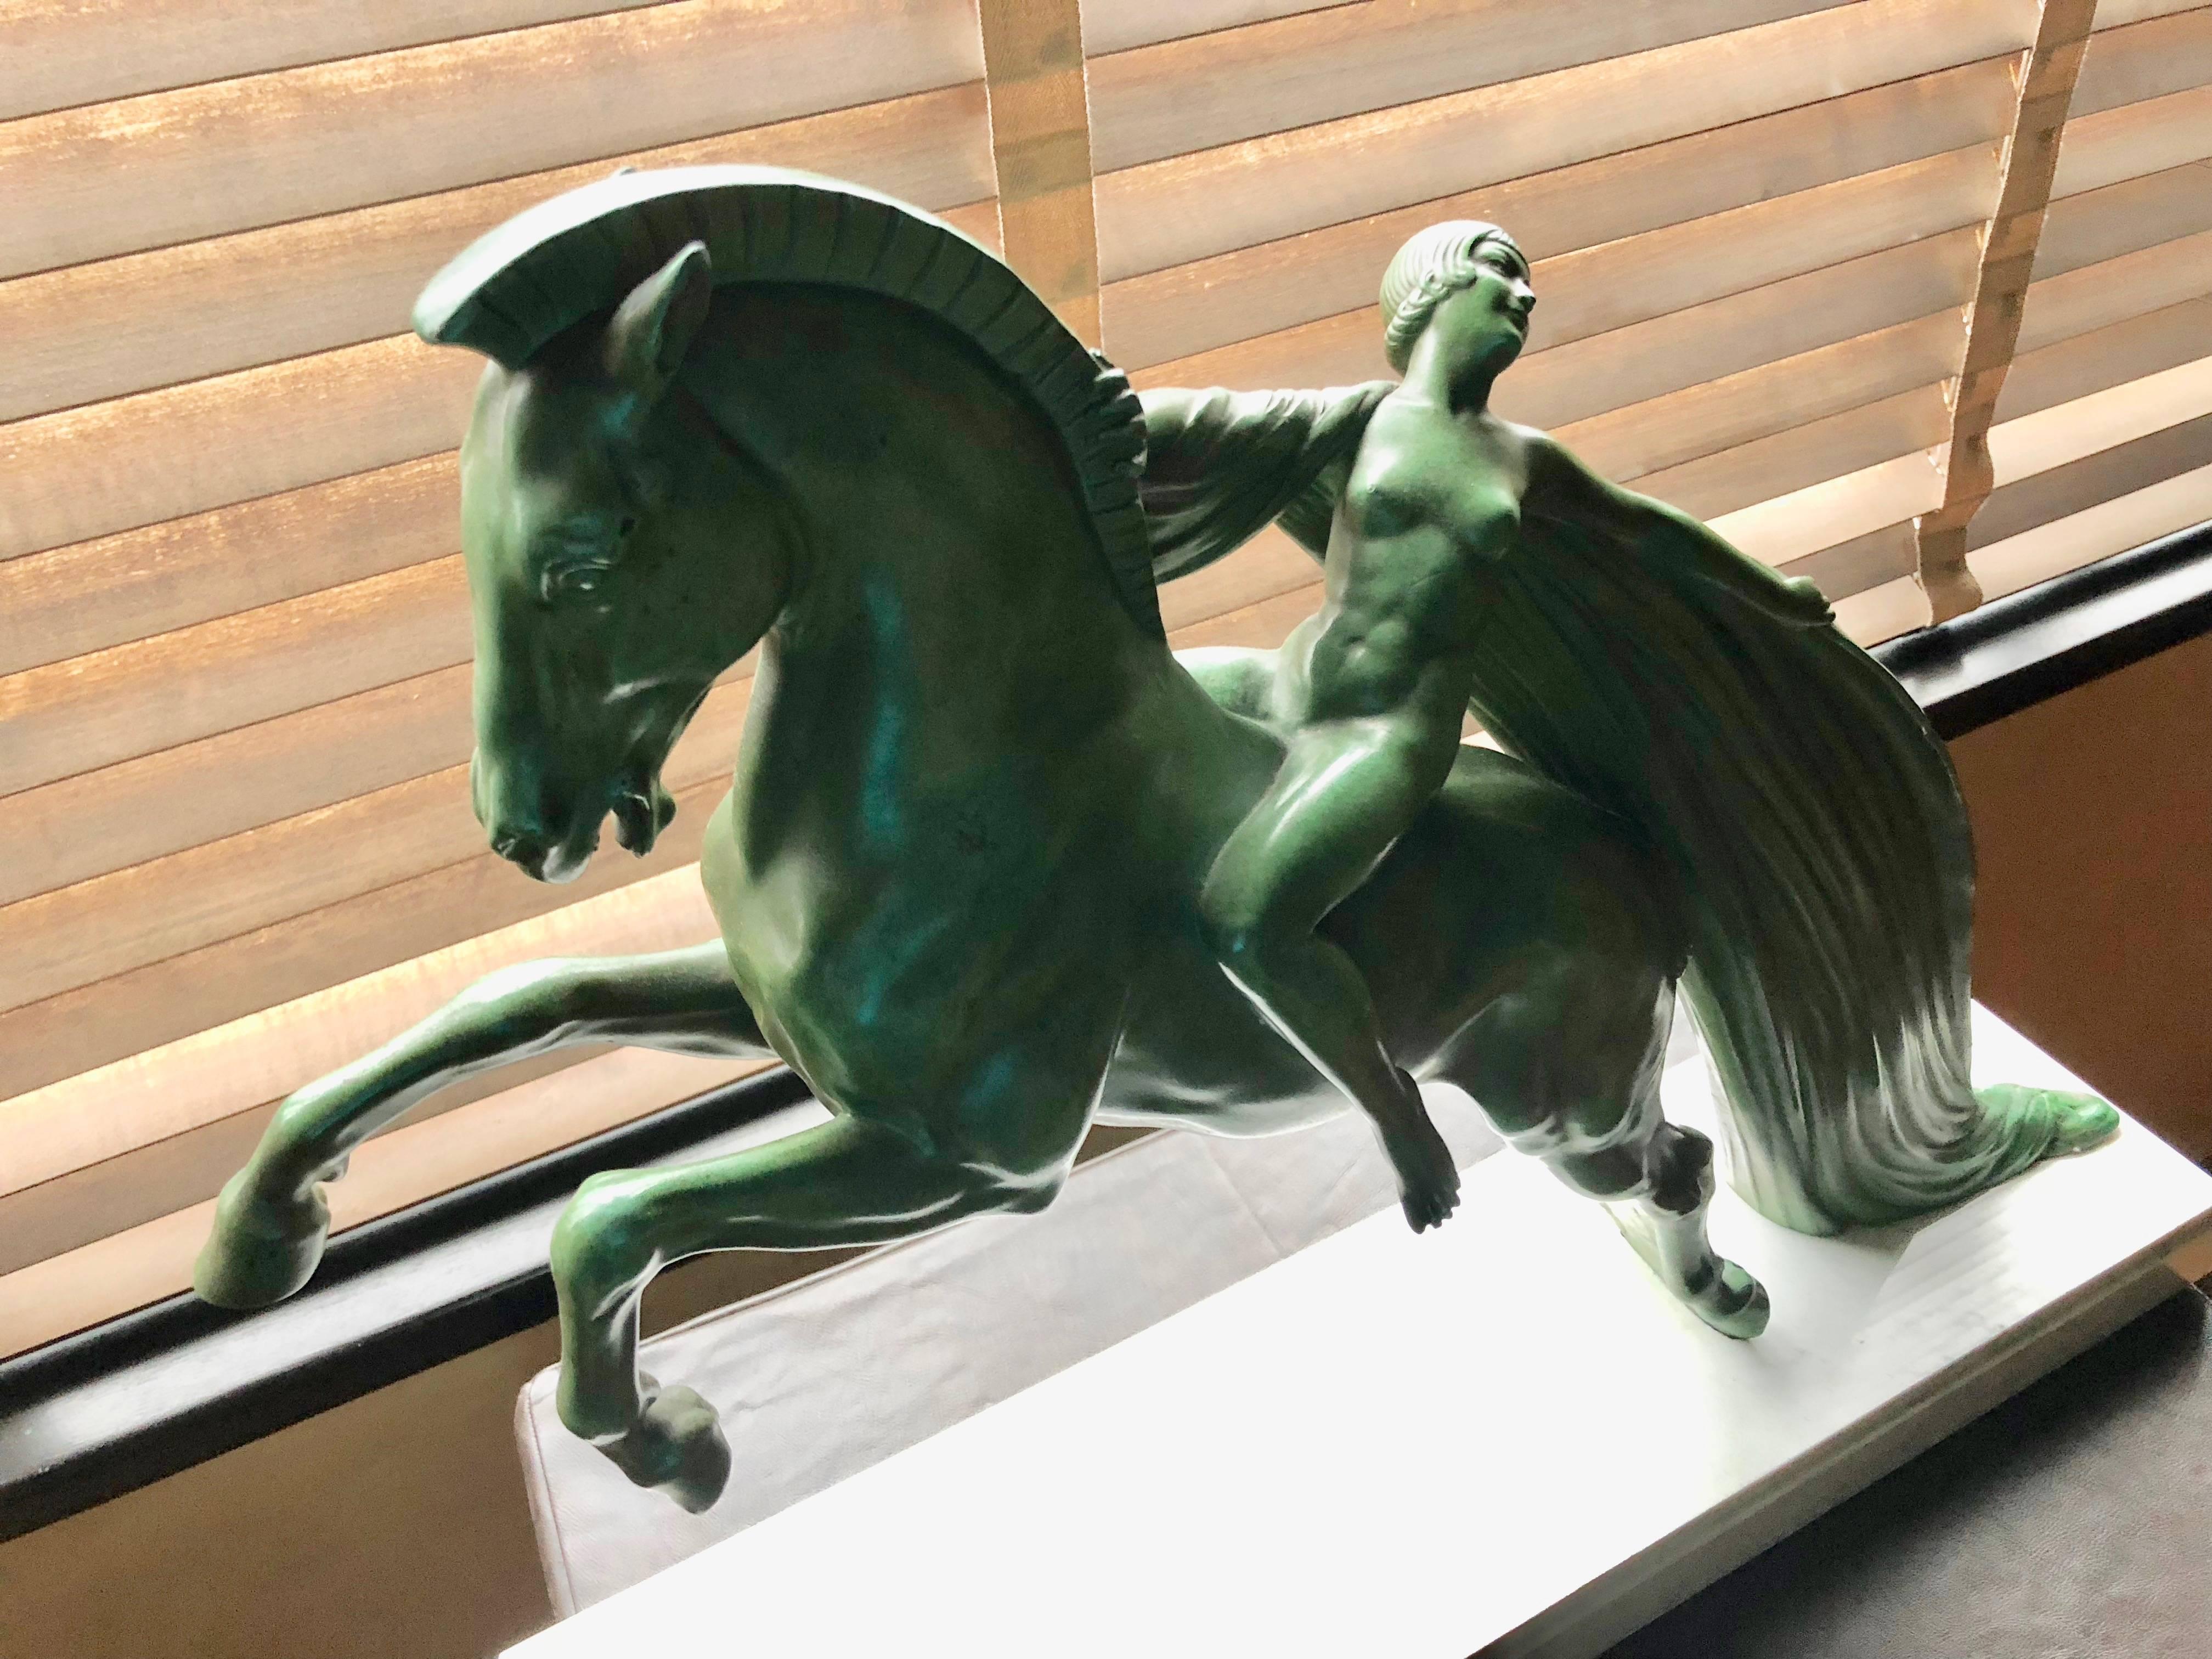 1930s Art Deco sculpture of a woman on a horse named Chevauchée signed by the artist, C. Charles. This original piece was made in the Max Le Verrier studio atelier in France. The sculpture was cast in bronzed metal and has a beautiful greenish